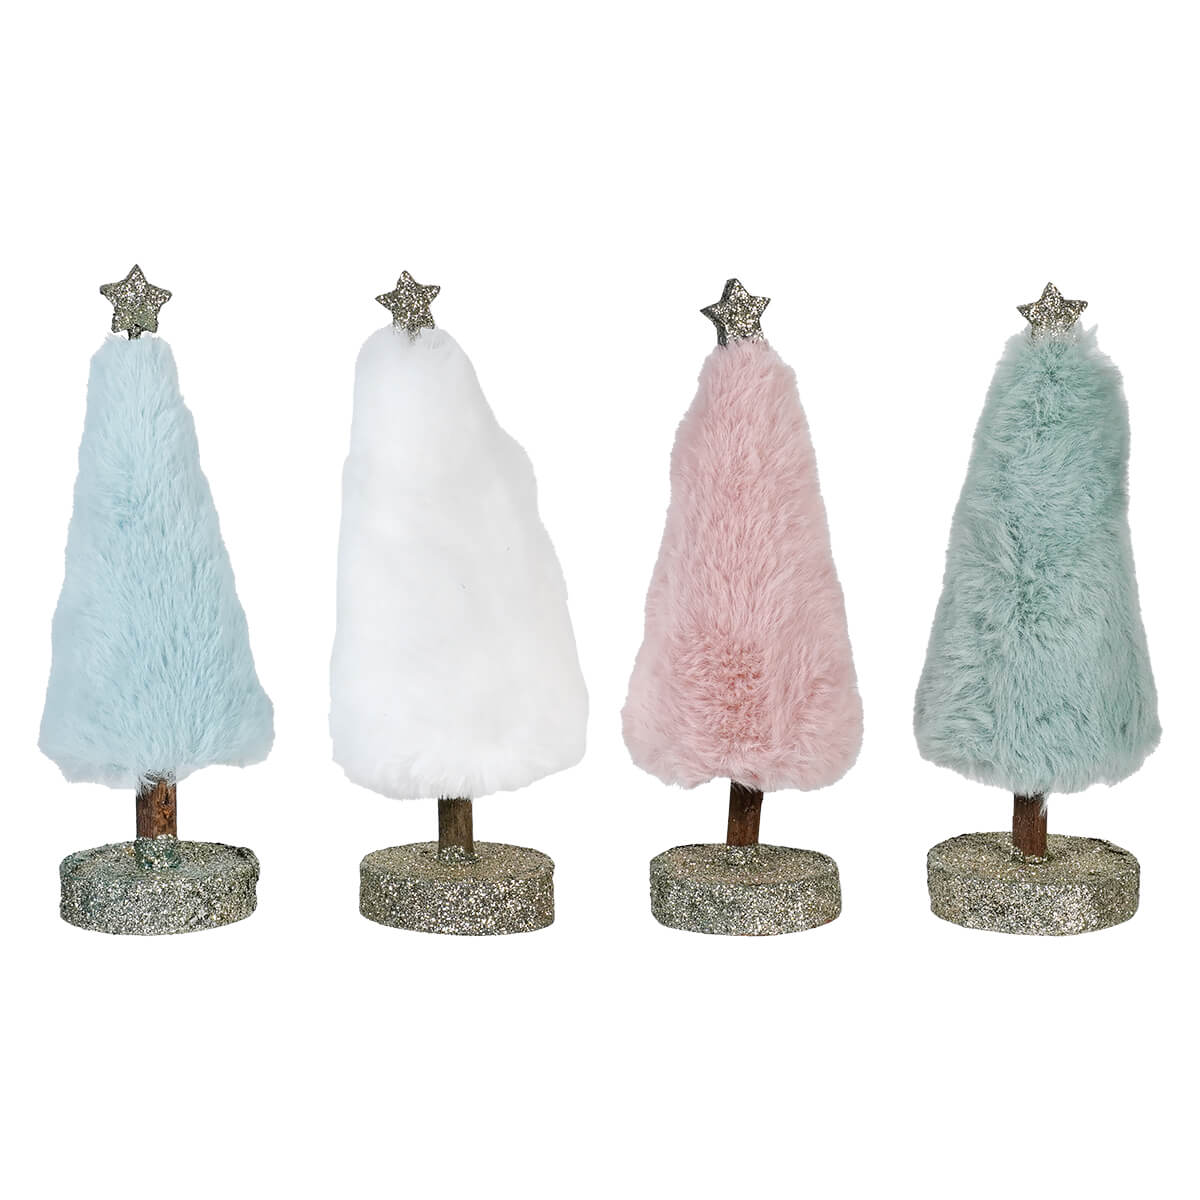 Star Topped Fur Trees On Wood Base Set/4